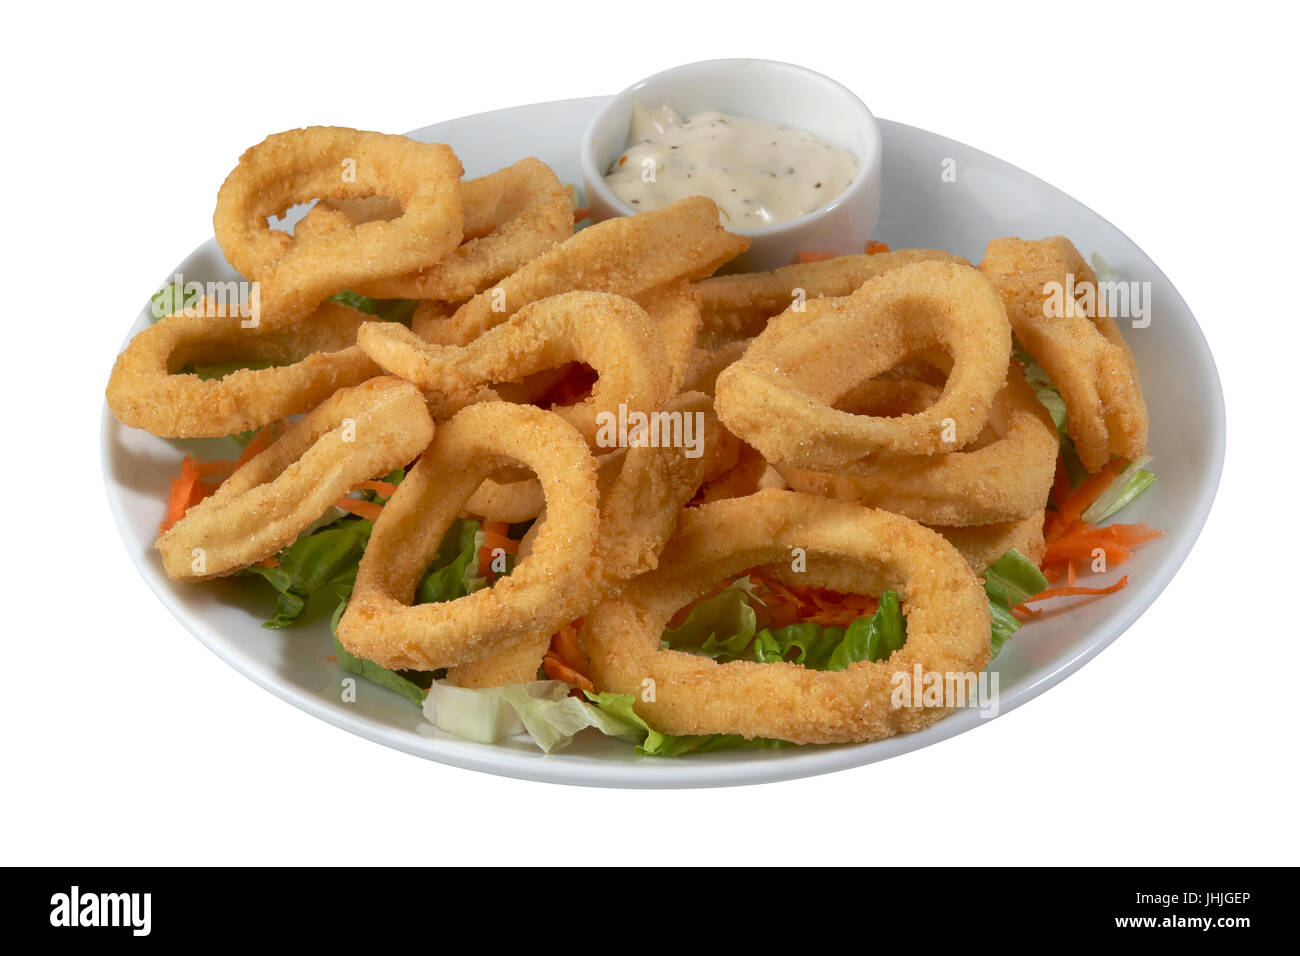 Plate of Delicious Fried calamari with Seafood pasta Stock Photo